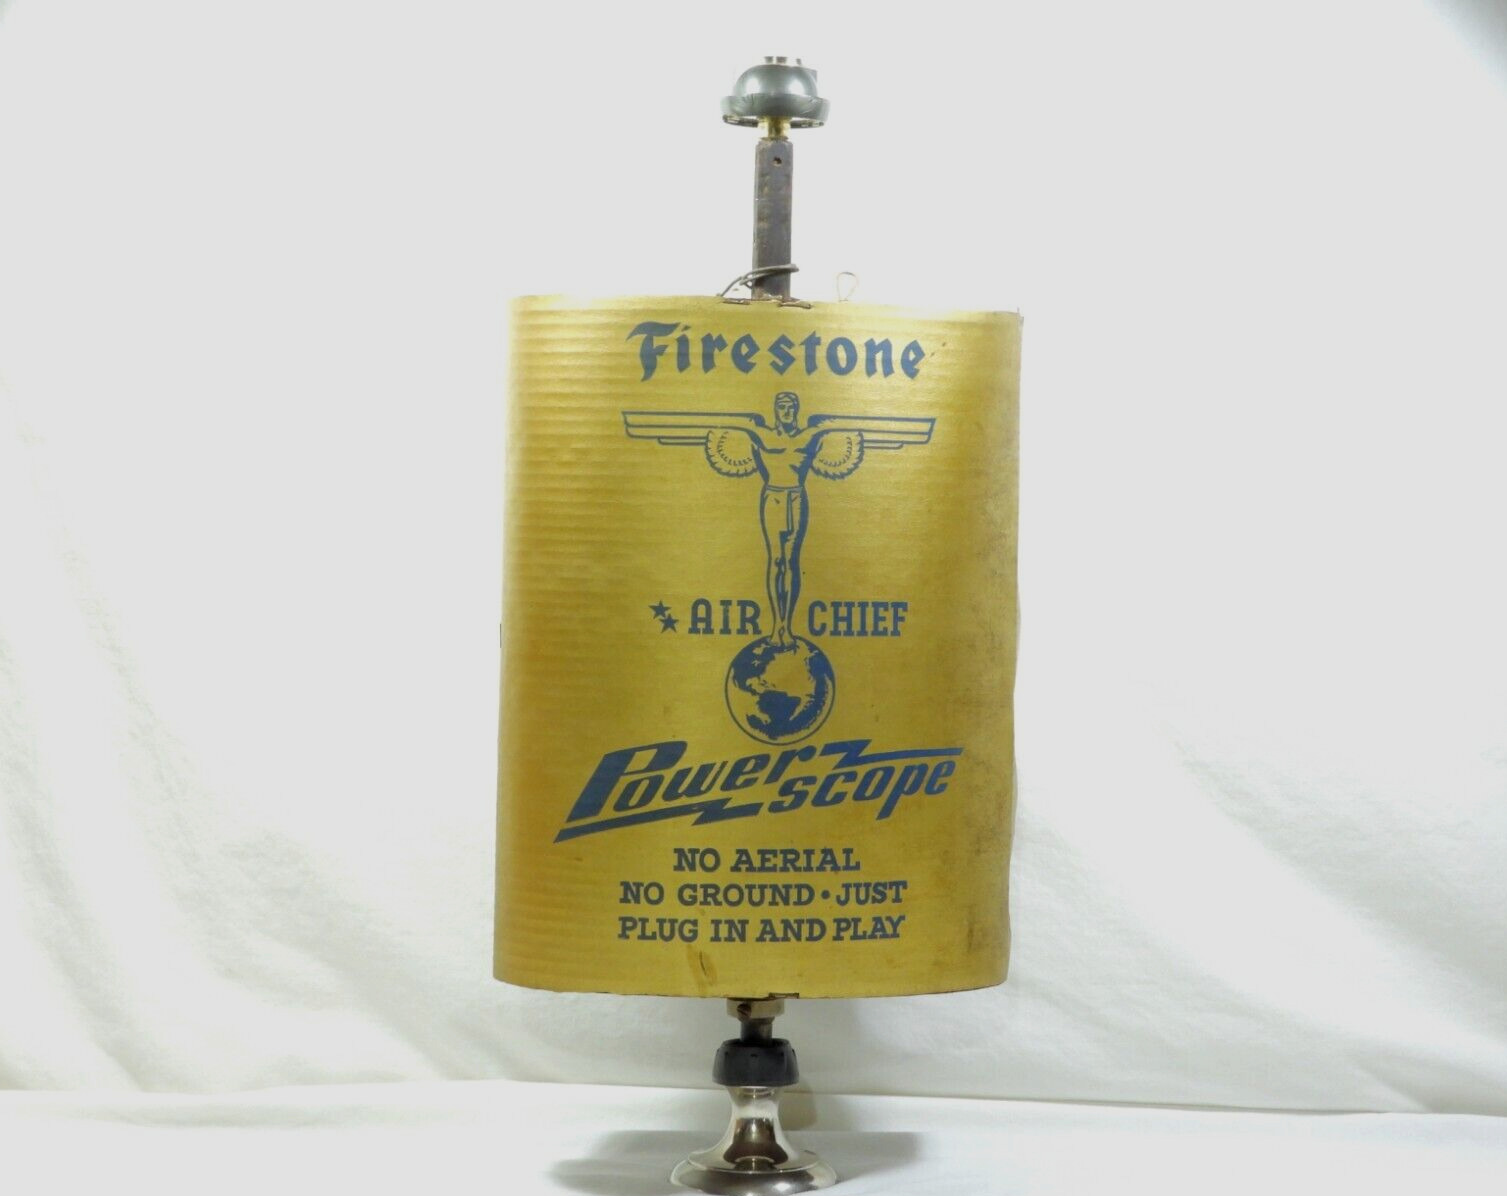 vintage Firestone Air Chief Power Scope Antenna, late 1940's, display ready